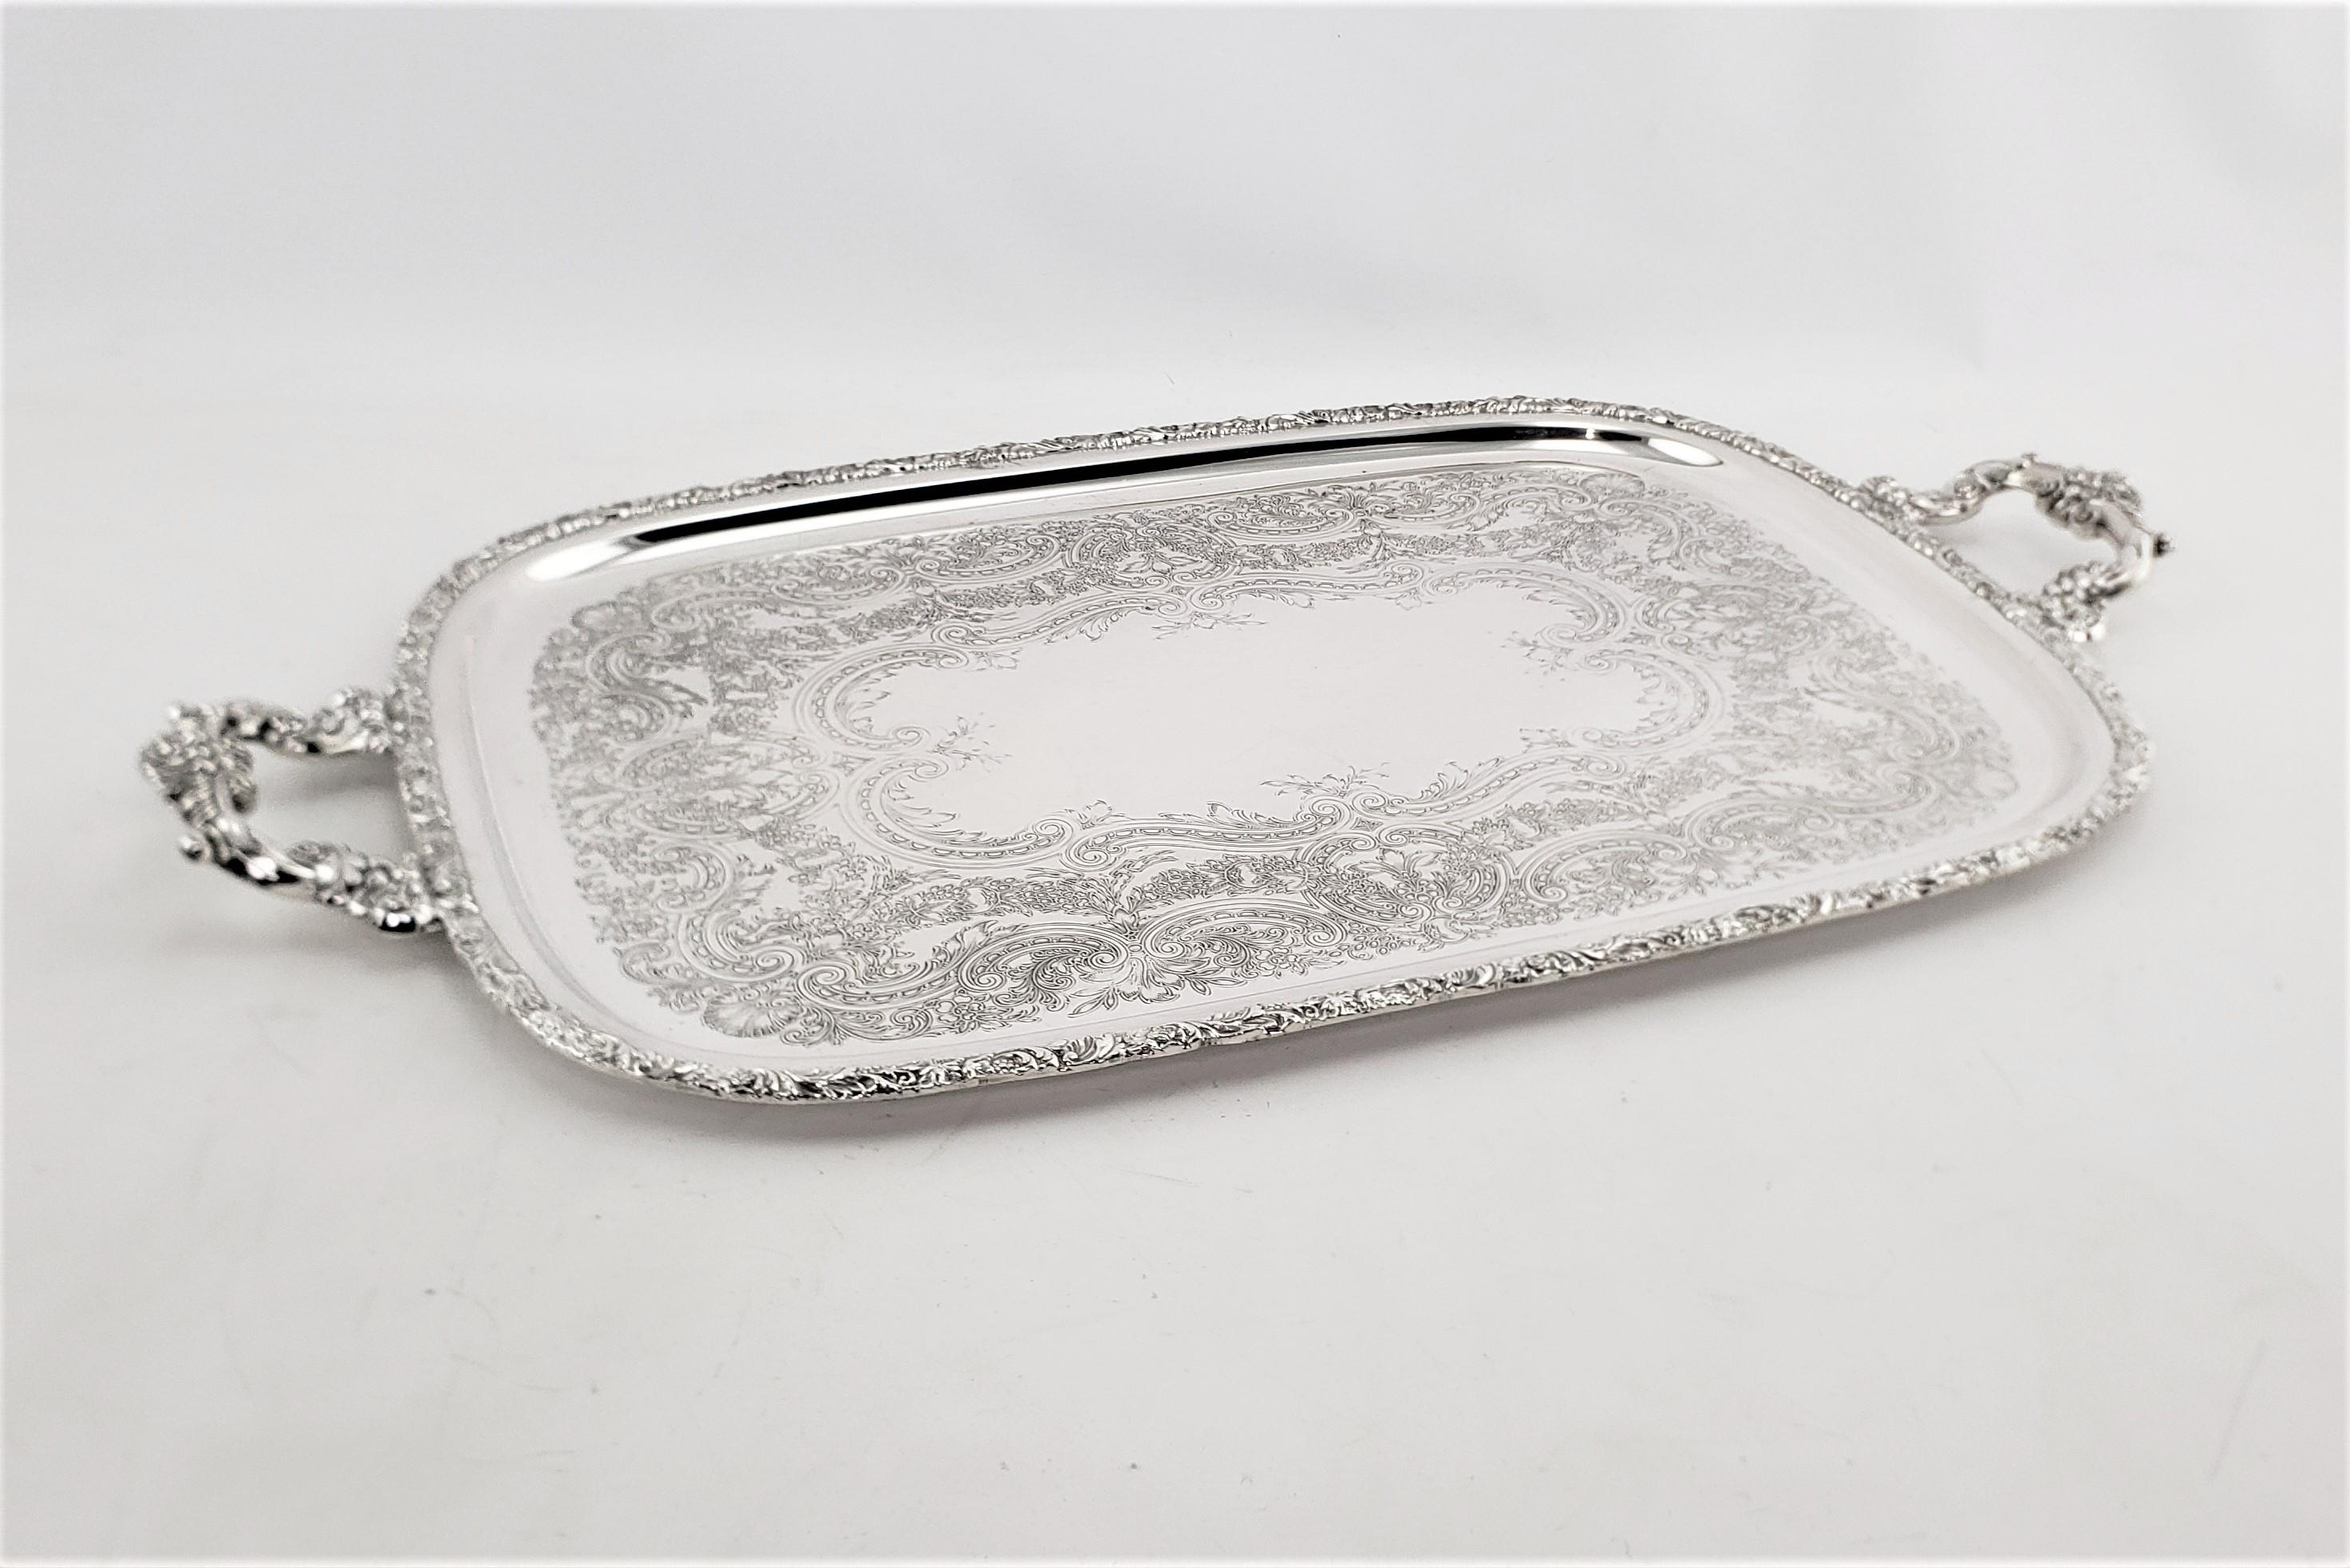 Machine-Made Large Antique English Silver Plated Serving Tray with Ornate Handles & Engraving